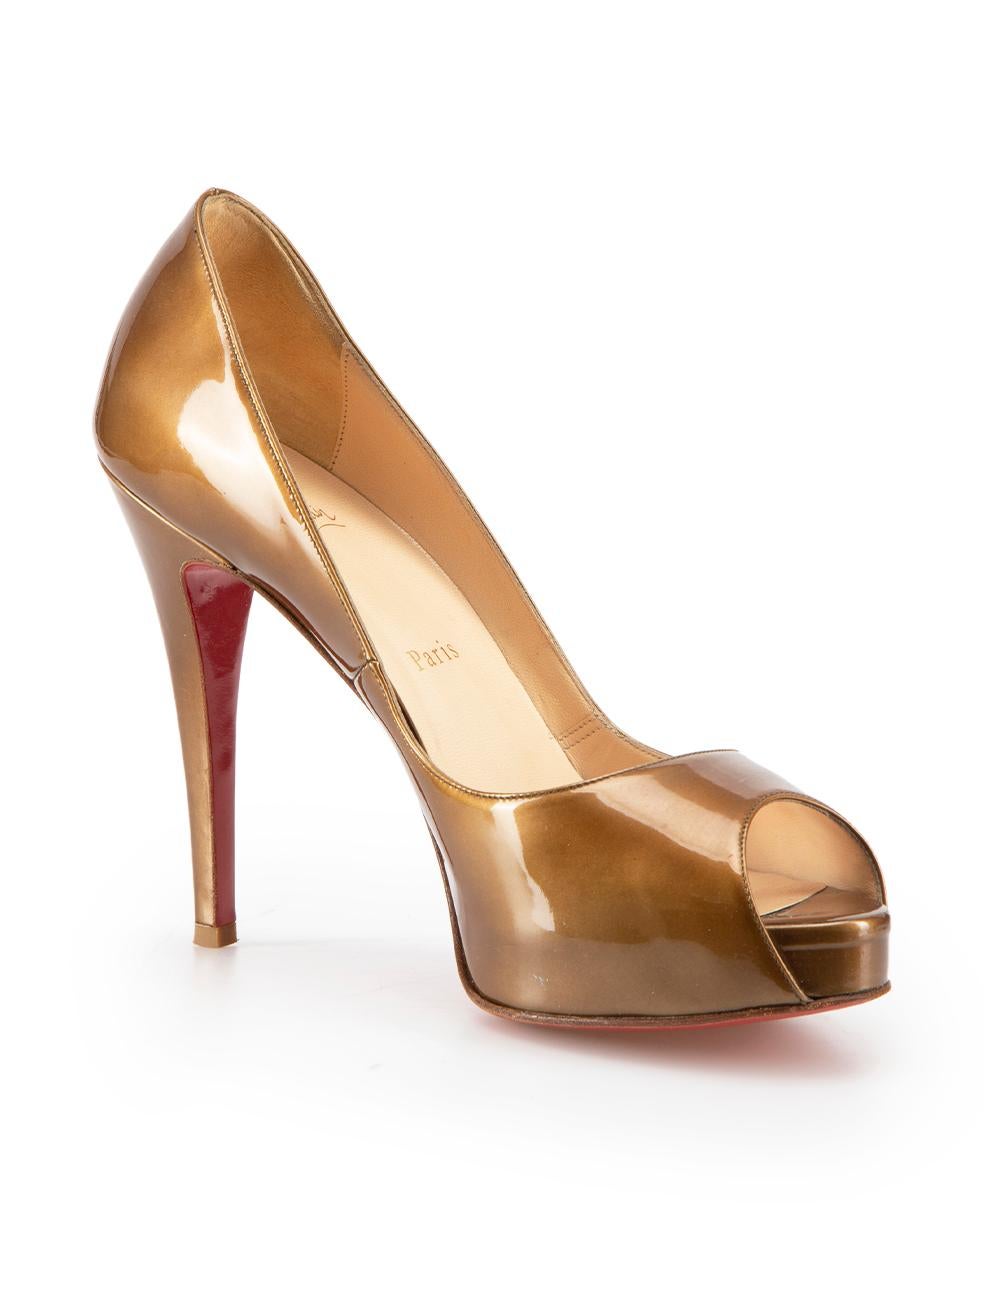 CONDITION is Very good. Minimal wear to heels is evident. Minimal wear to upper however insoles are lightly marked and very mild damage sustained to outsole on this used Christian Louboutin designer resale item.
  
Details
Brown
Patent